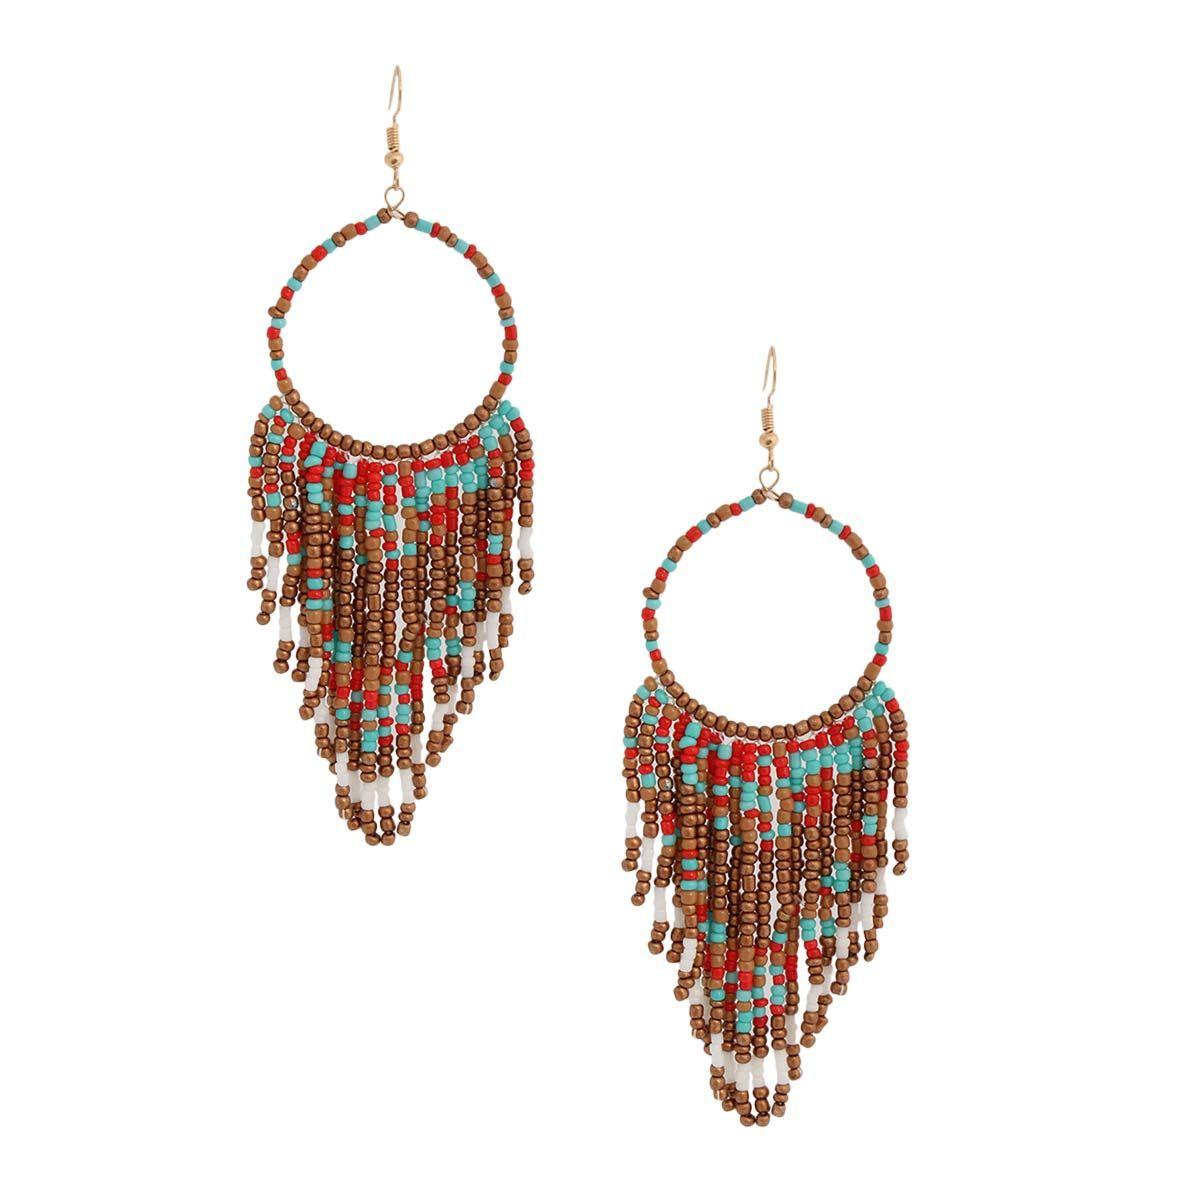 Get Glam with Multi & Gold Bead Fringe Earrings - Shop Now!